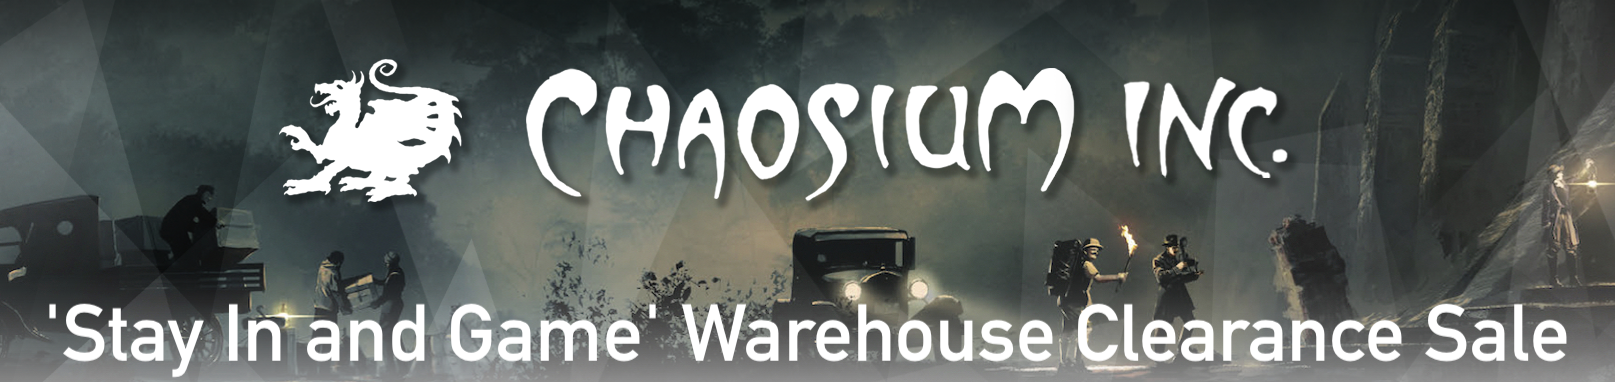 Warehouse Clearance Sale - Special Offers - Sale